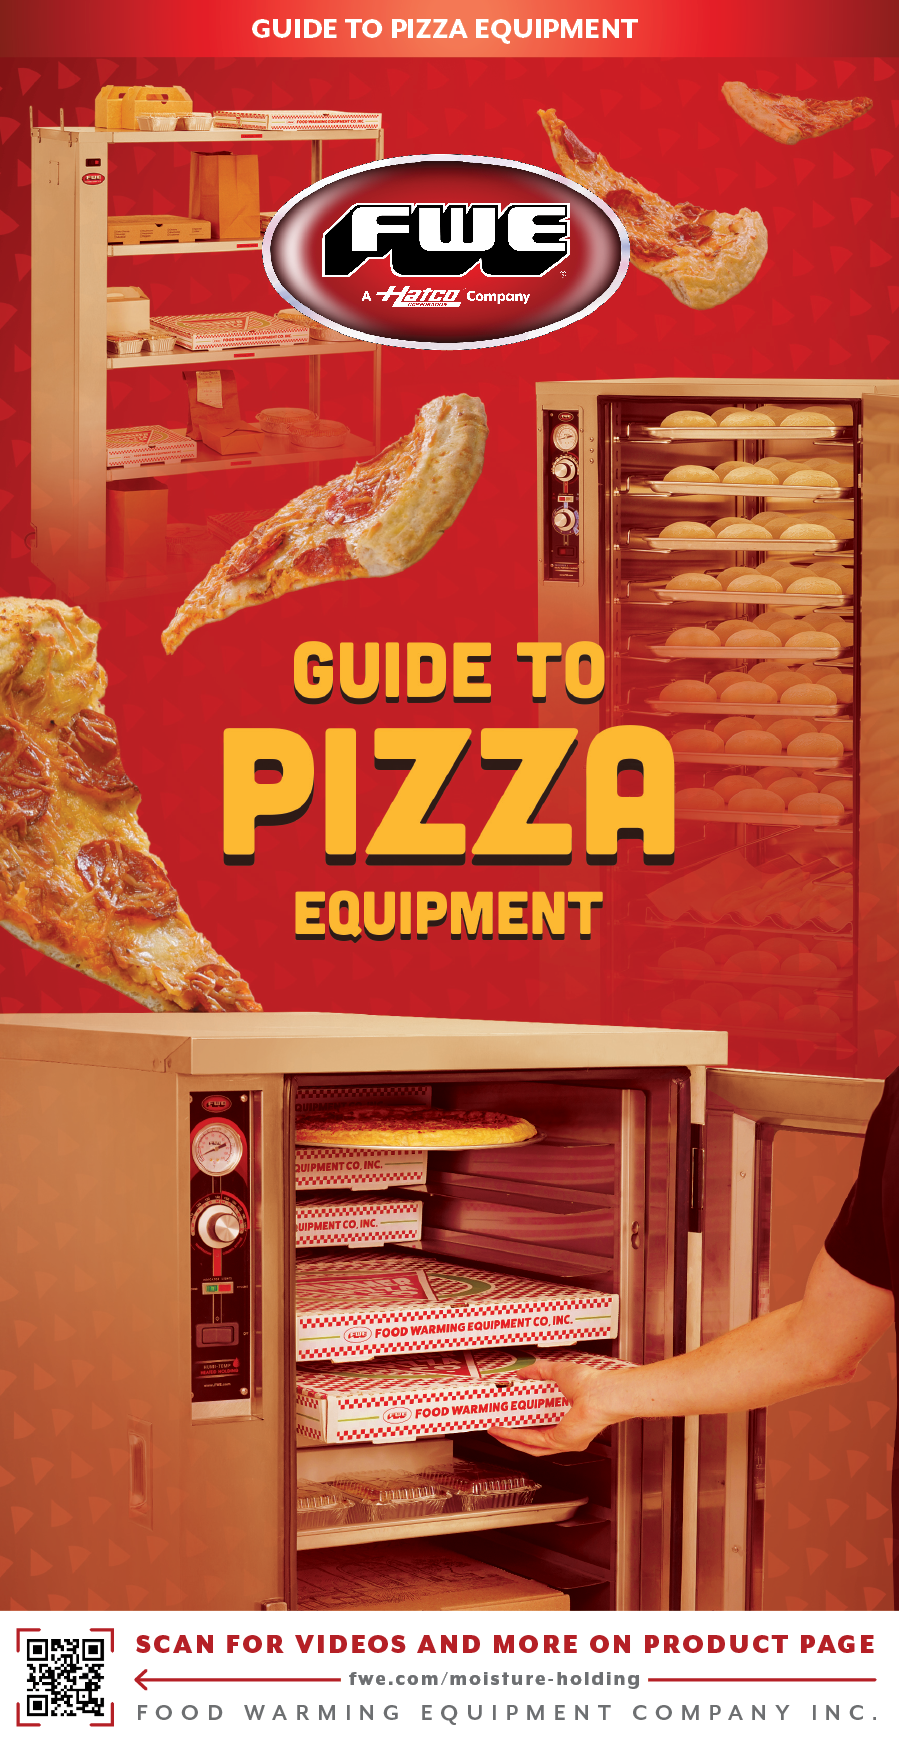 Guide to Pizza Equipment